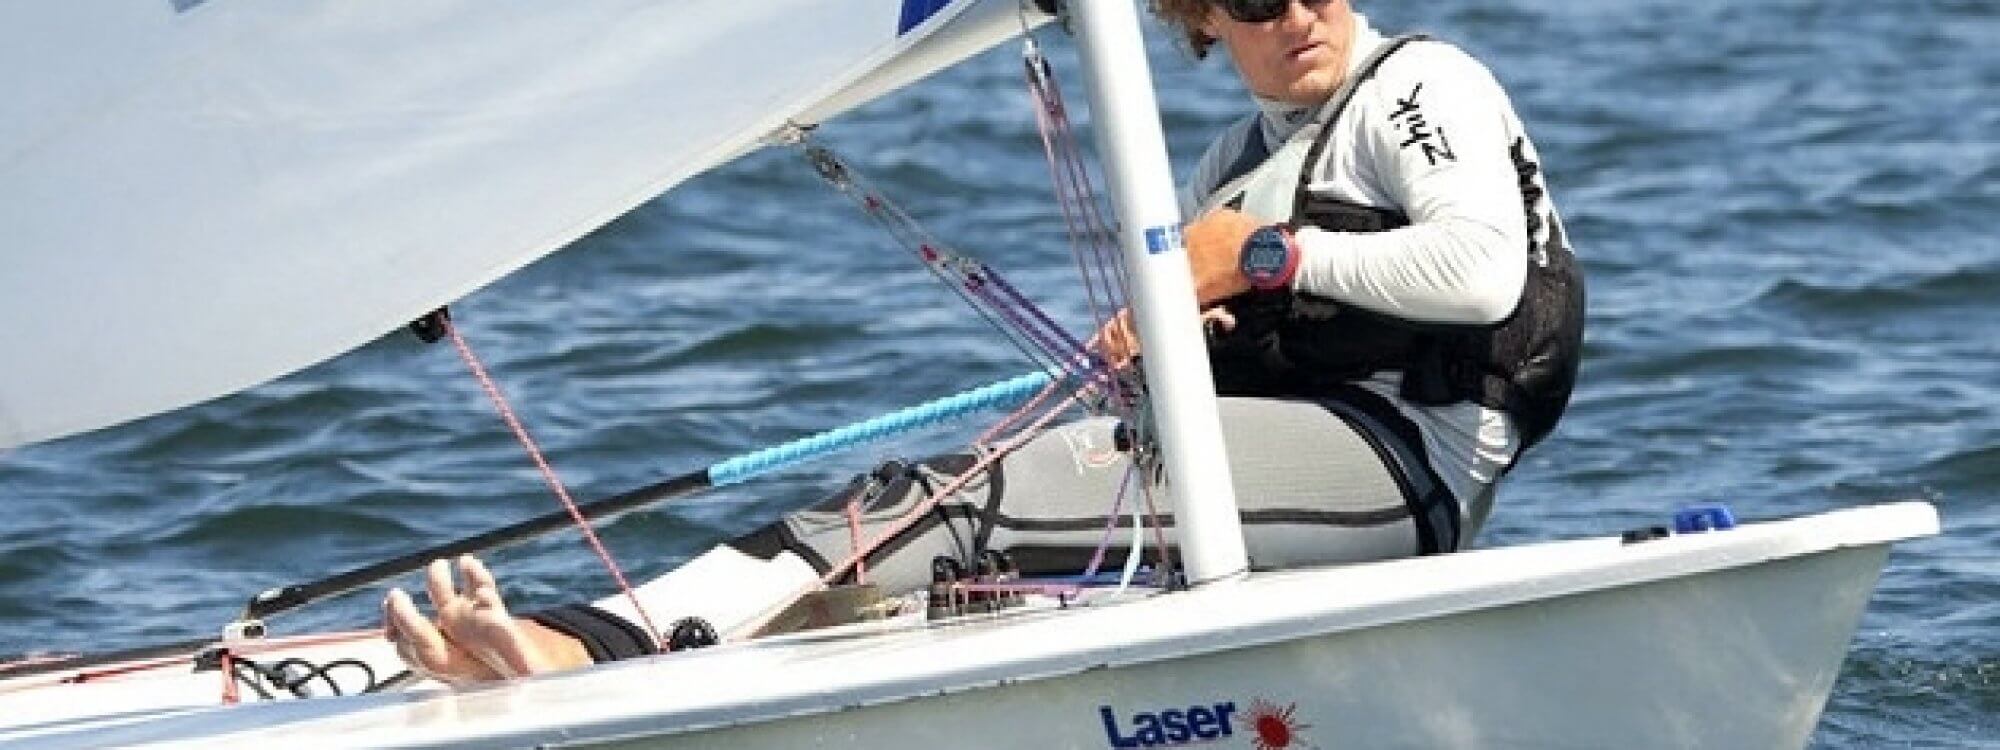 Scott Bader Showcasing Olympic Laser Dinghy, Adhesives and Composite Materials at JEC World 2017